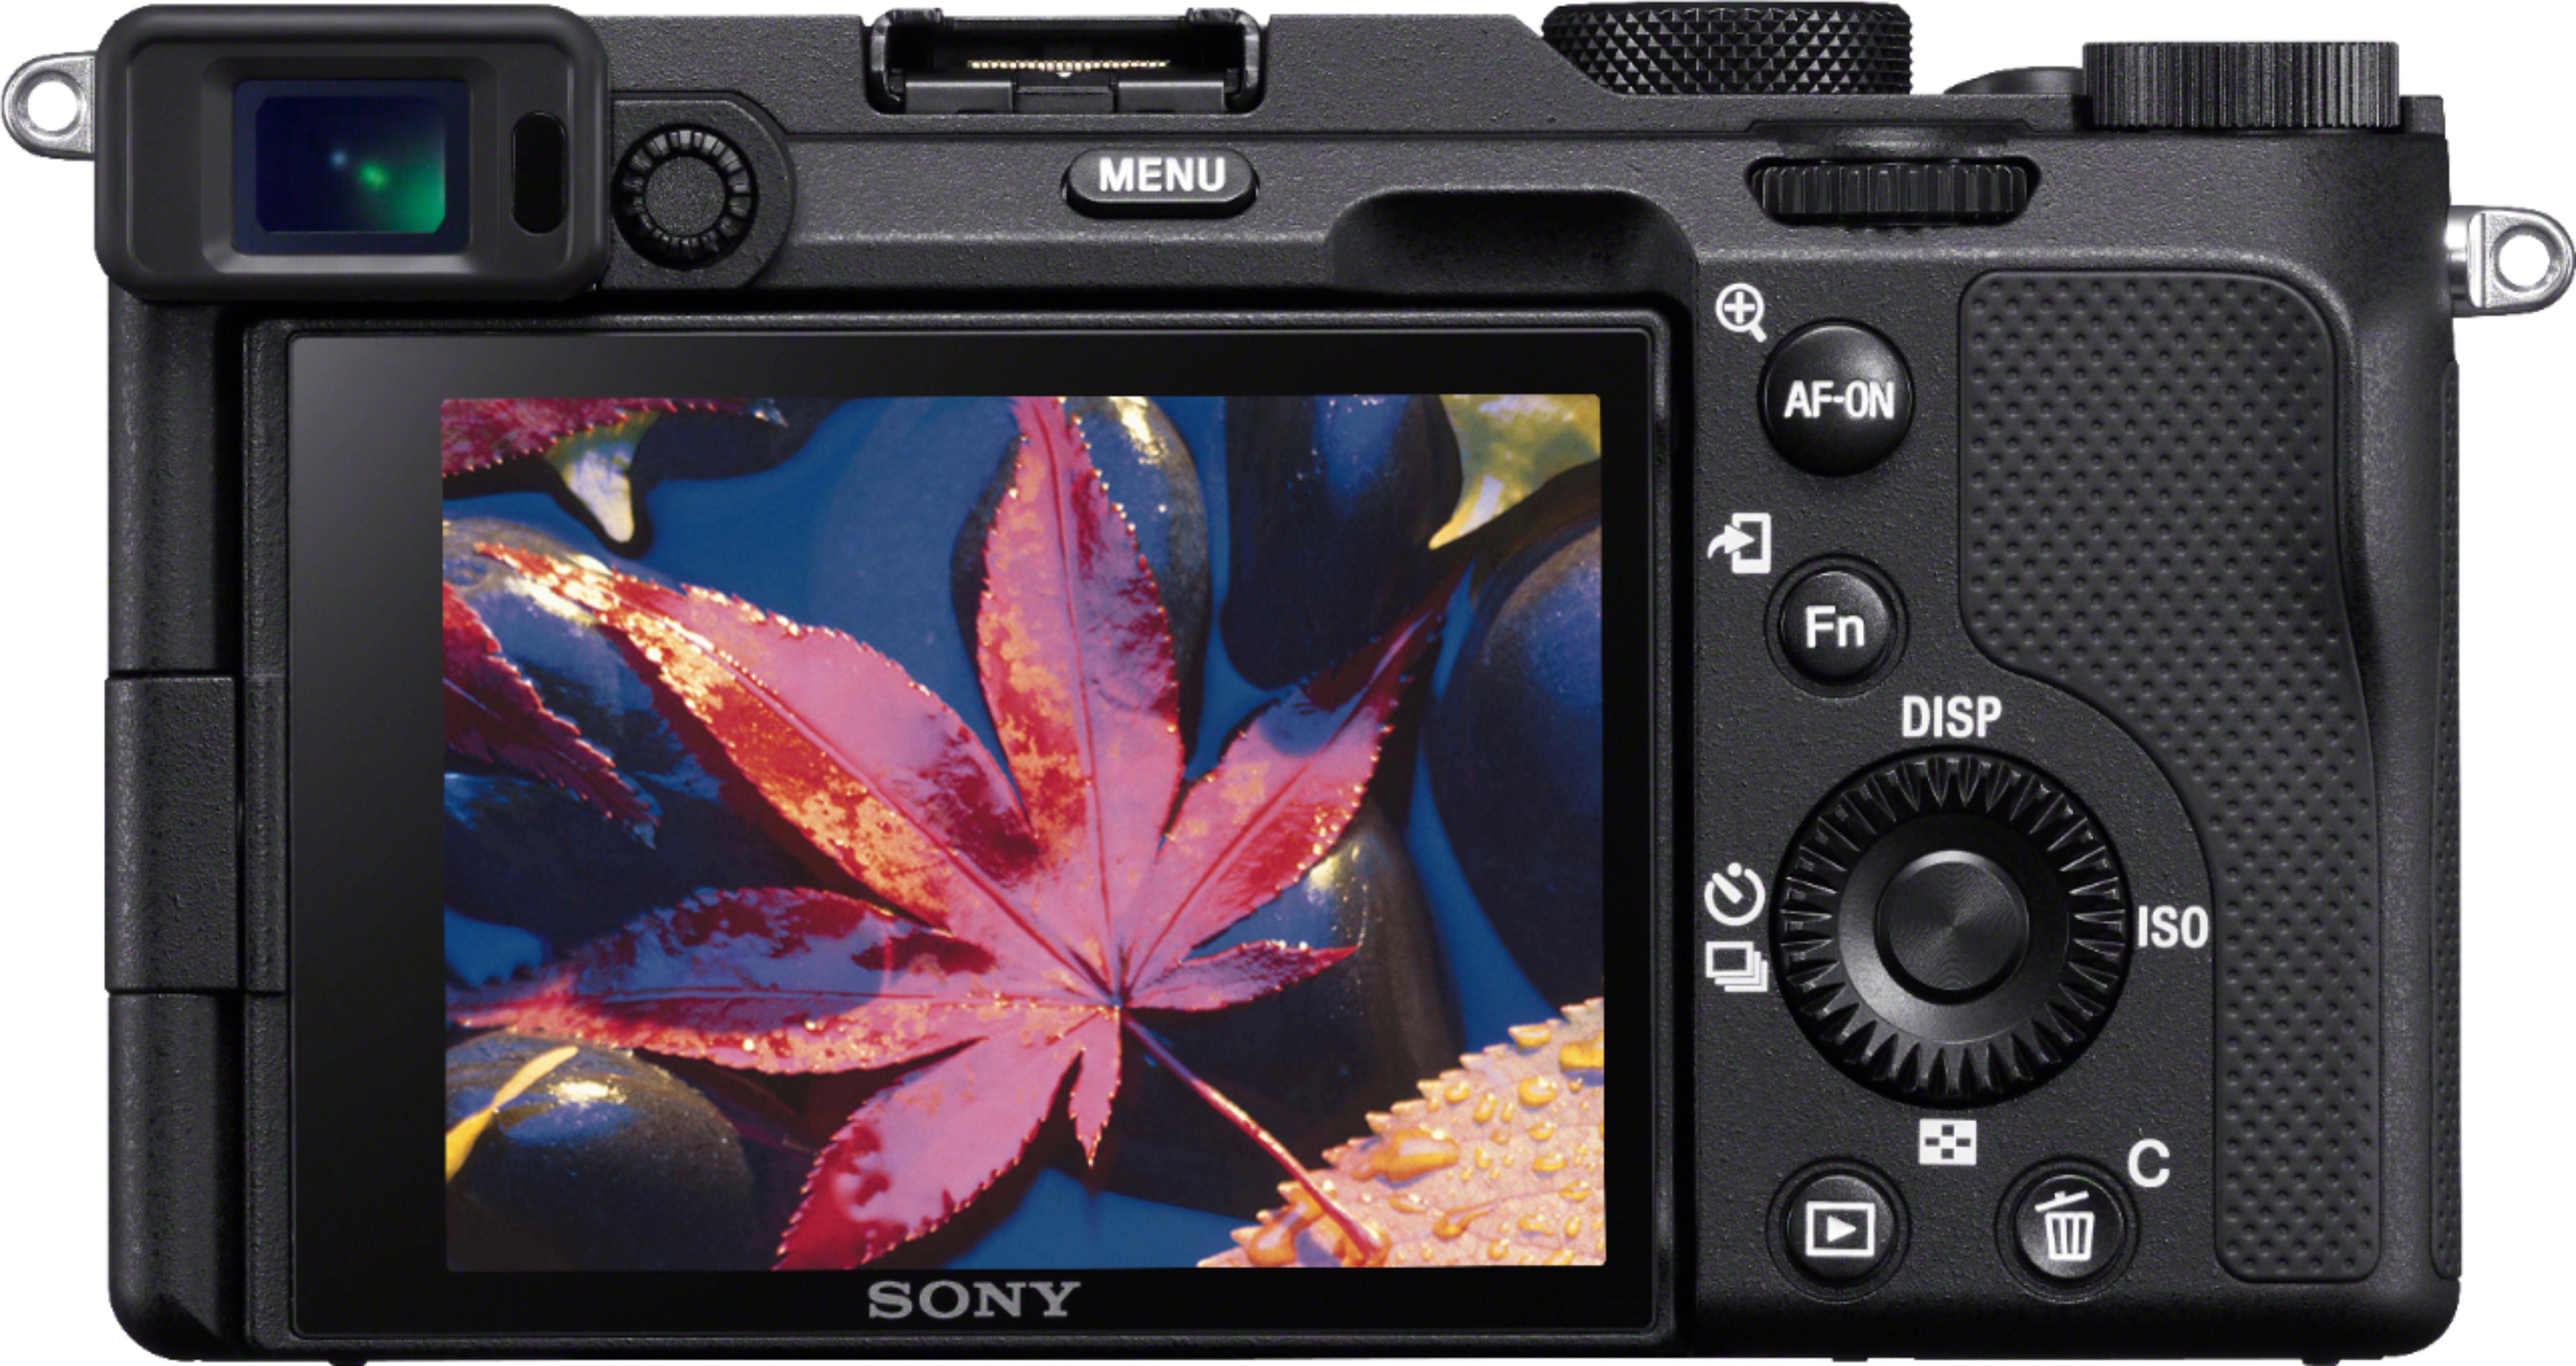 Digital camera Sony Alpha 7 price from 1014€ to 4290€ 